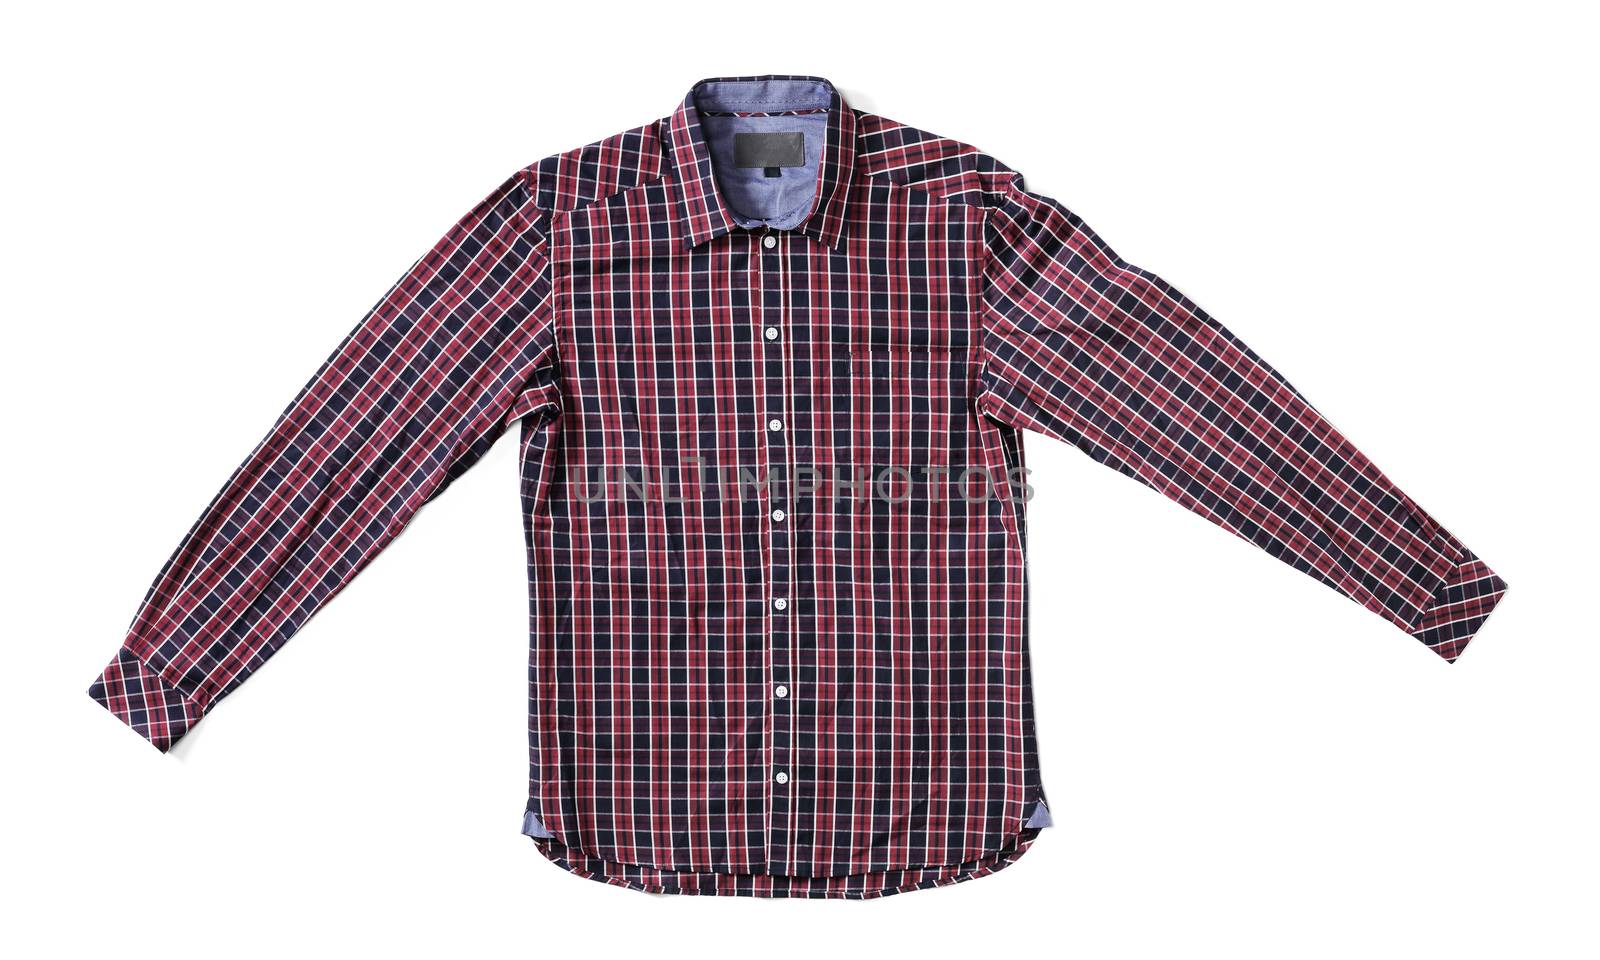 Men's red and black plaid shirt isolated on white with natural shadows.